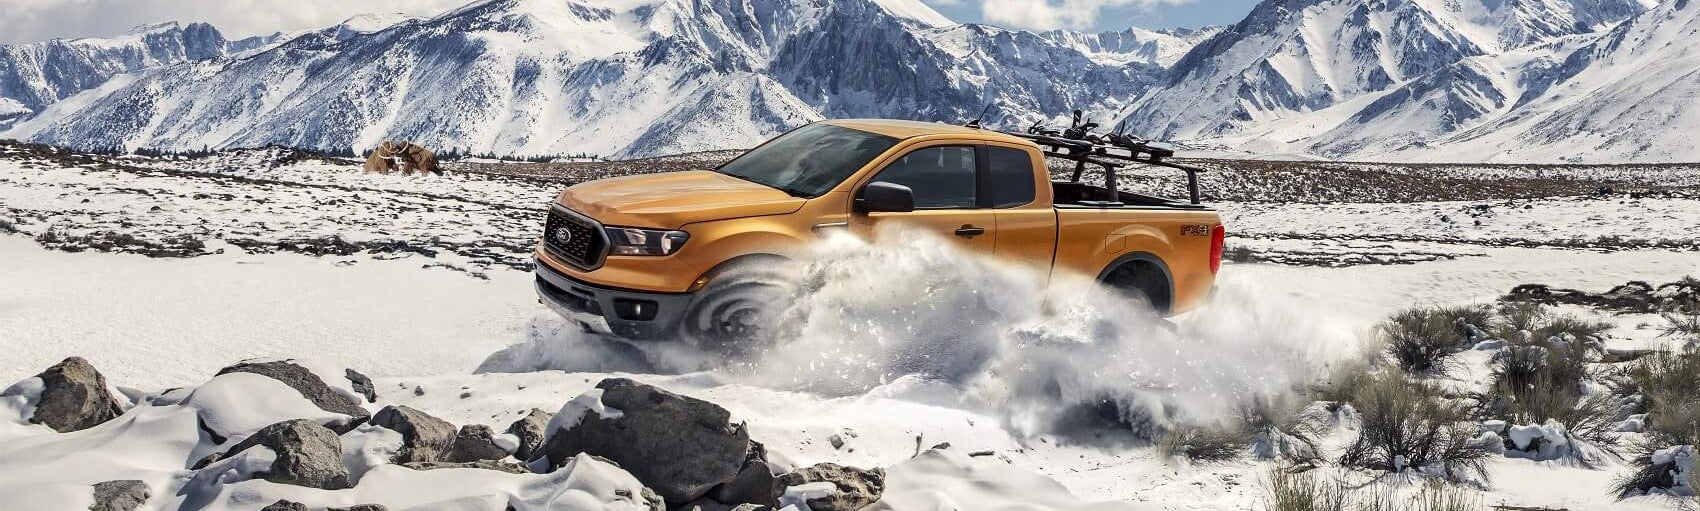 2023 Ford Ranger Wildtrak First Drive Review: Over Everything But Snow